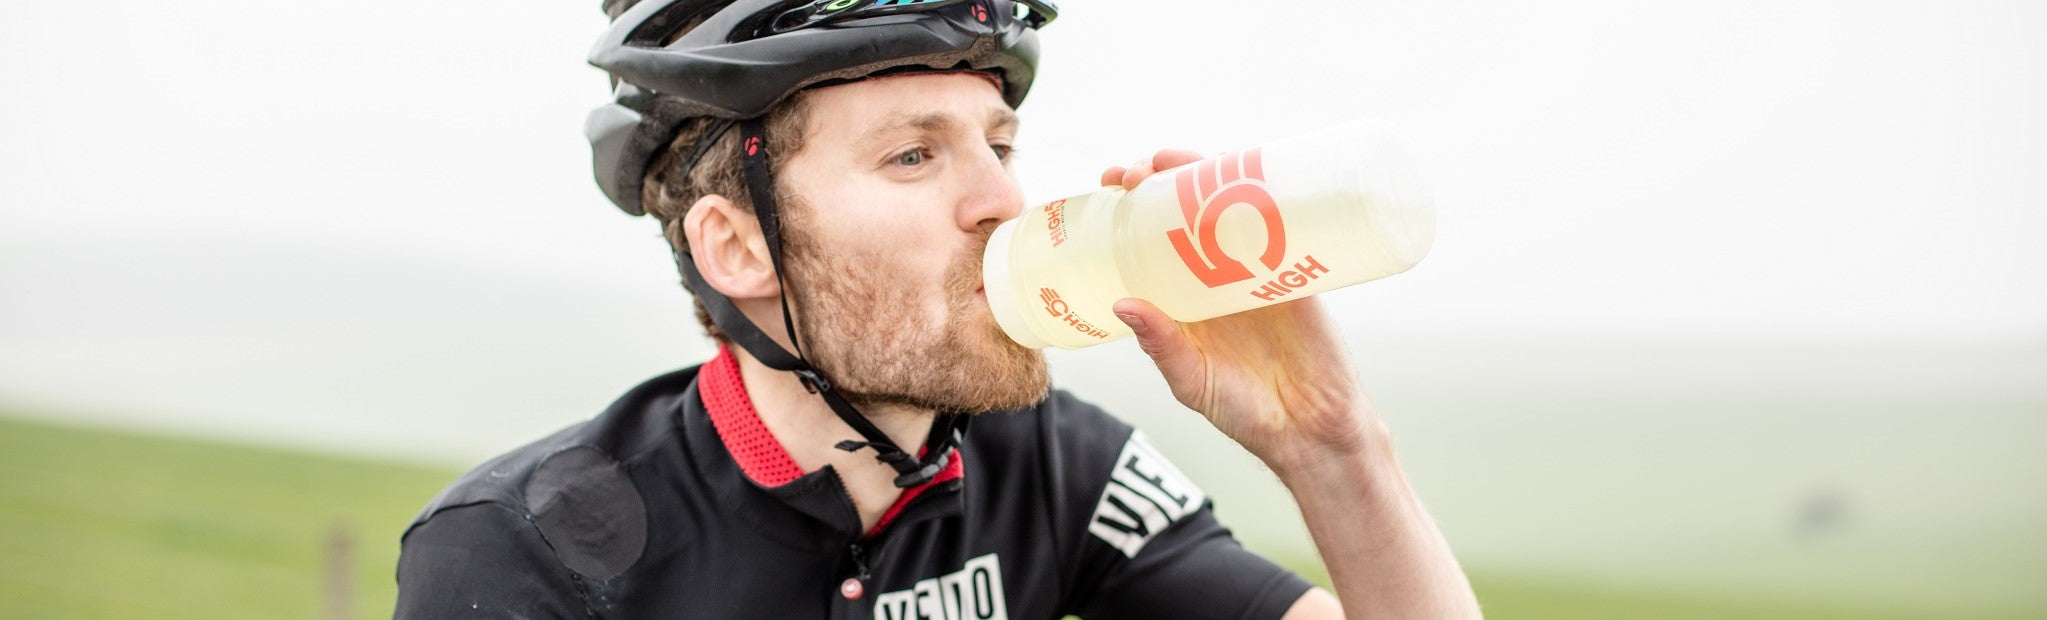 It's important to hydrate properly when cycling